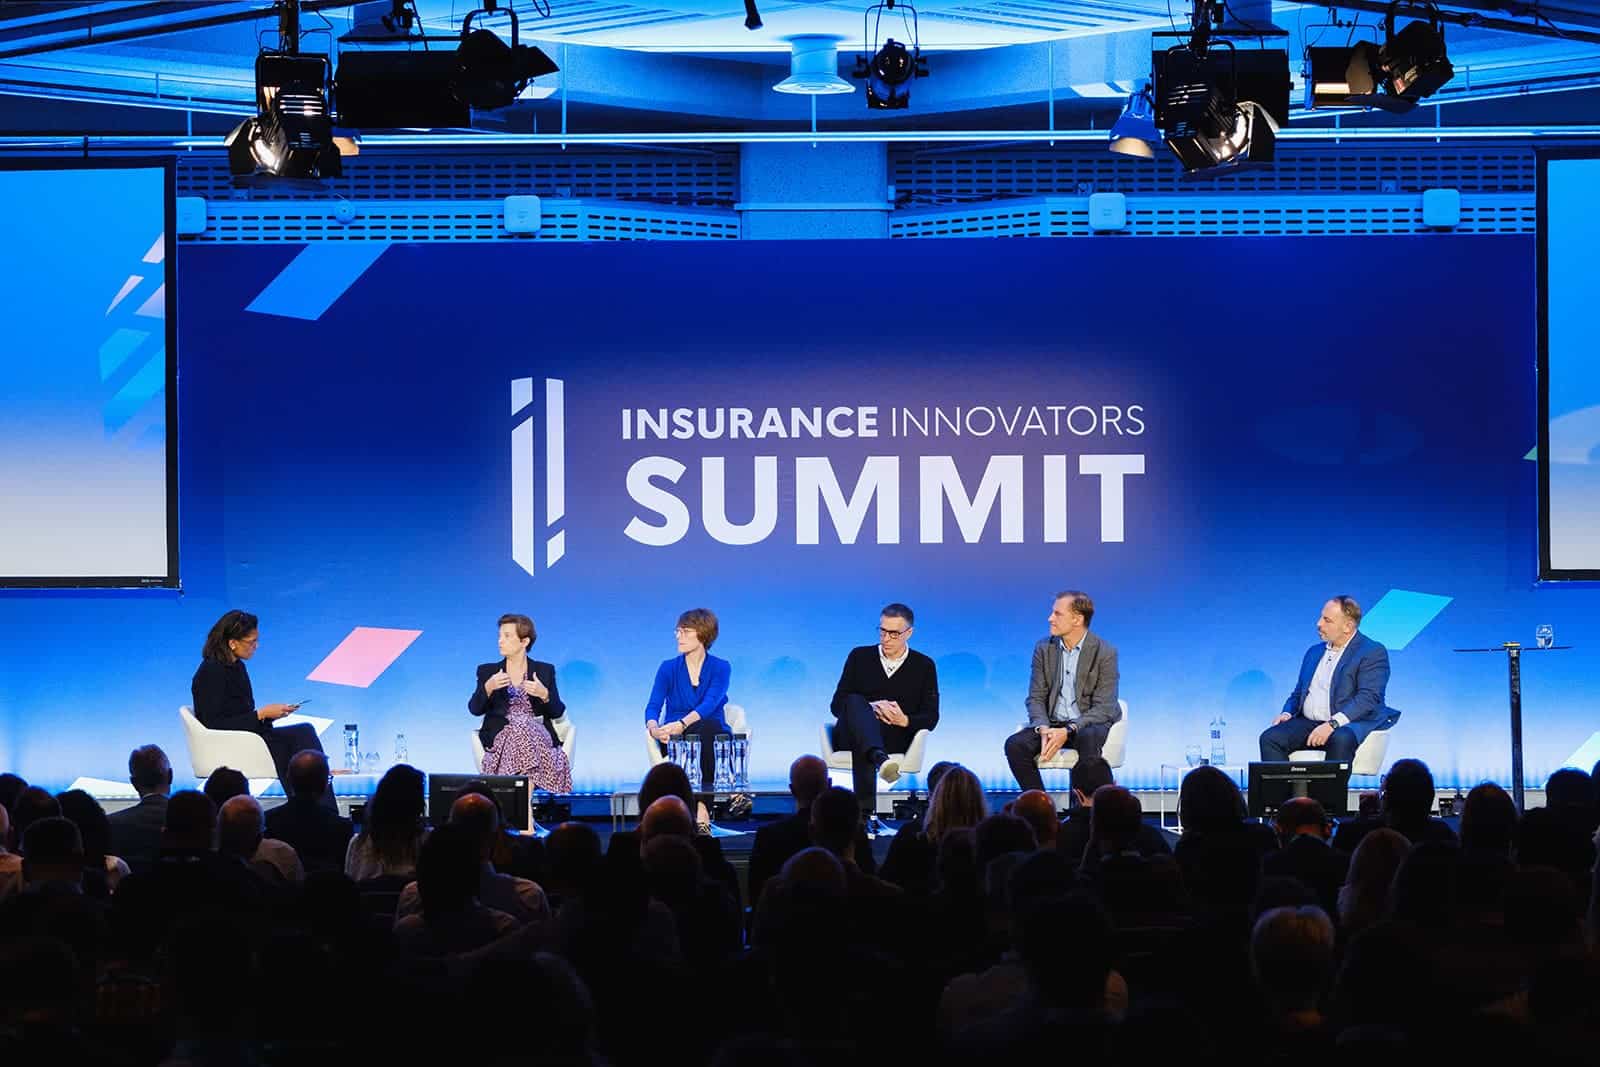 Image of previous insurance conference